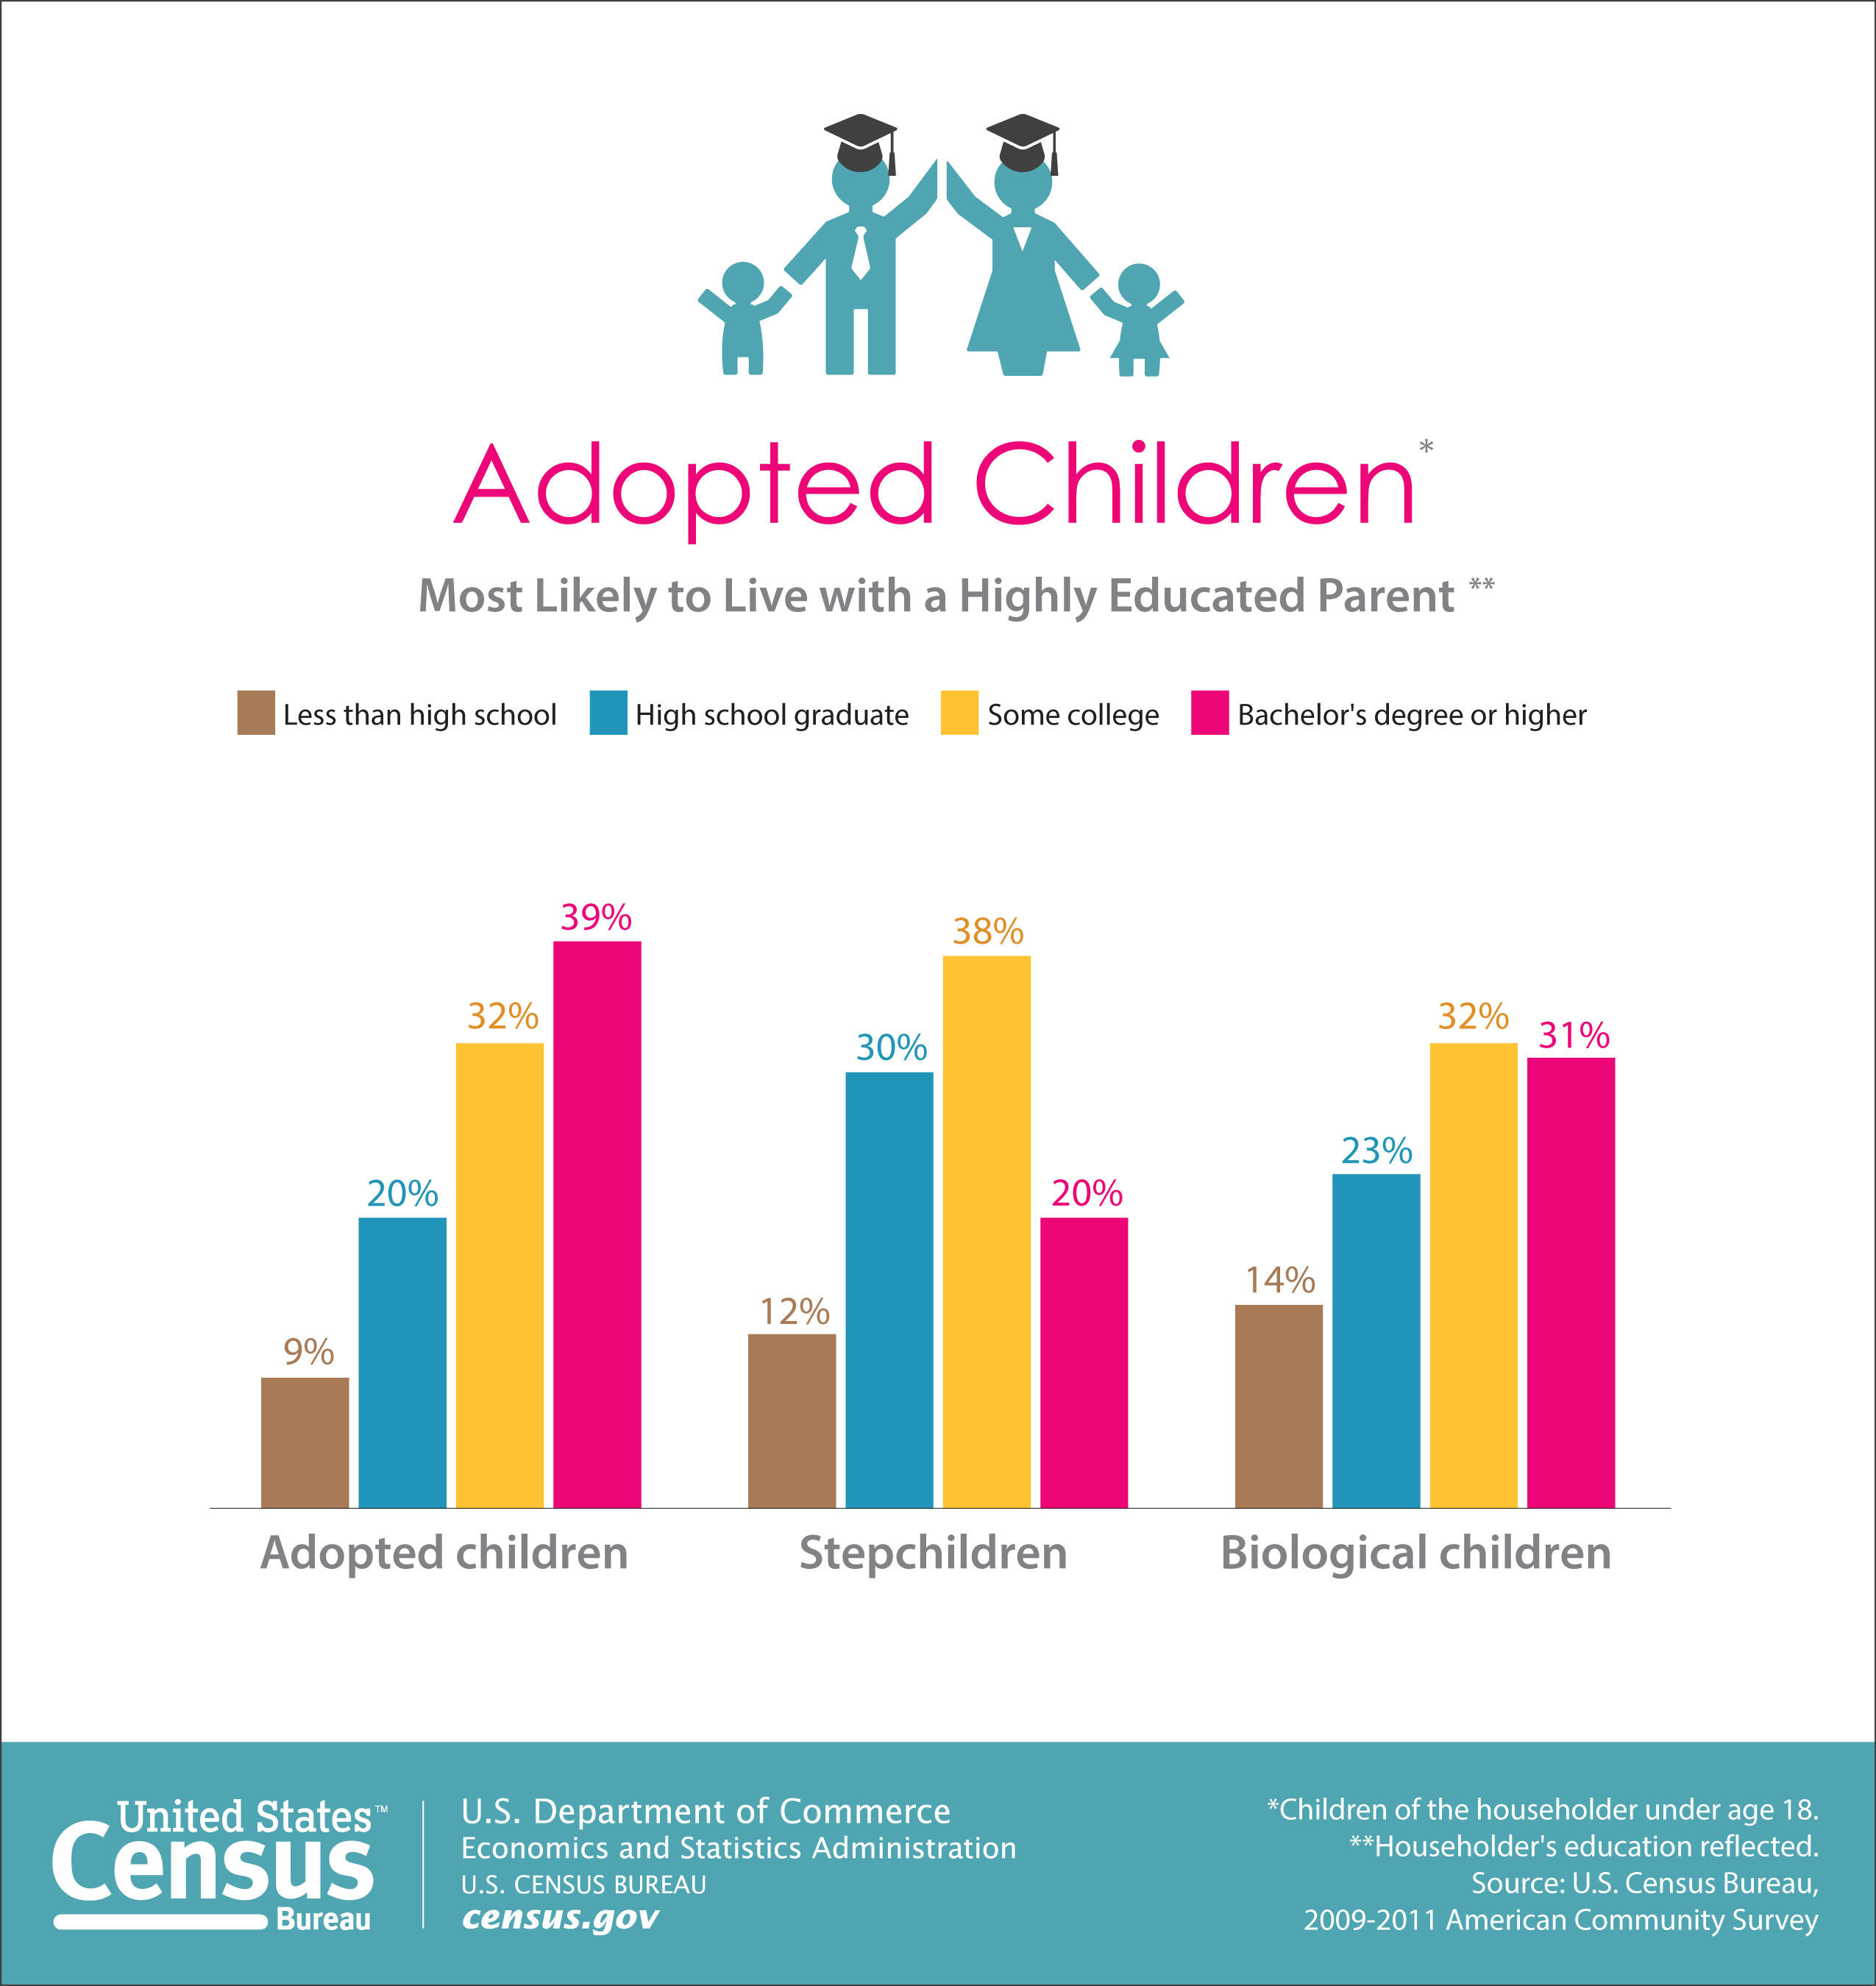 The Census Bureau released a new report that provides characteristics of adopted children and stepchildren of the householder using multiyear data from the American Community Survey (2009-2011) in addition to the 2010 Census and 2012 Current Population Survey. The Adopted Children and Stepchildren: 2010 report, examines characteristics such as education, income and poverty of the householder as well as country of origin of internationally adopted children. (PRNewsFoto/U.S. Census Bureau)